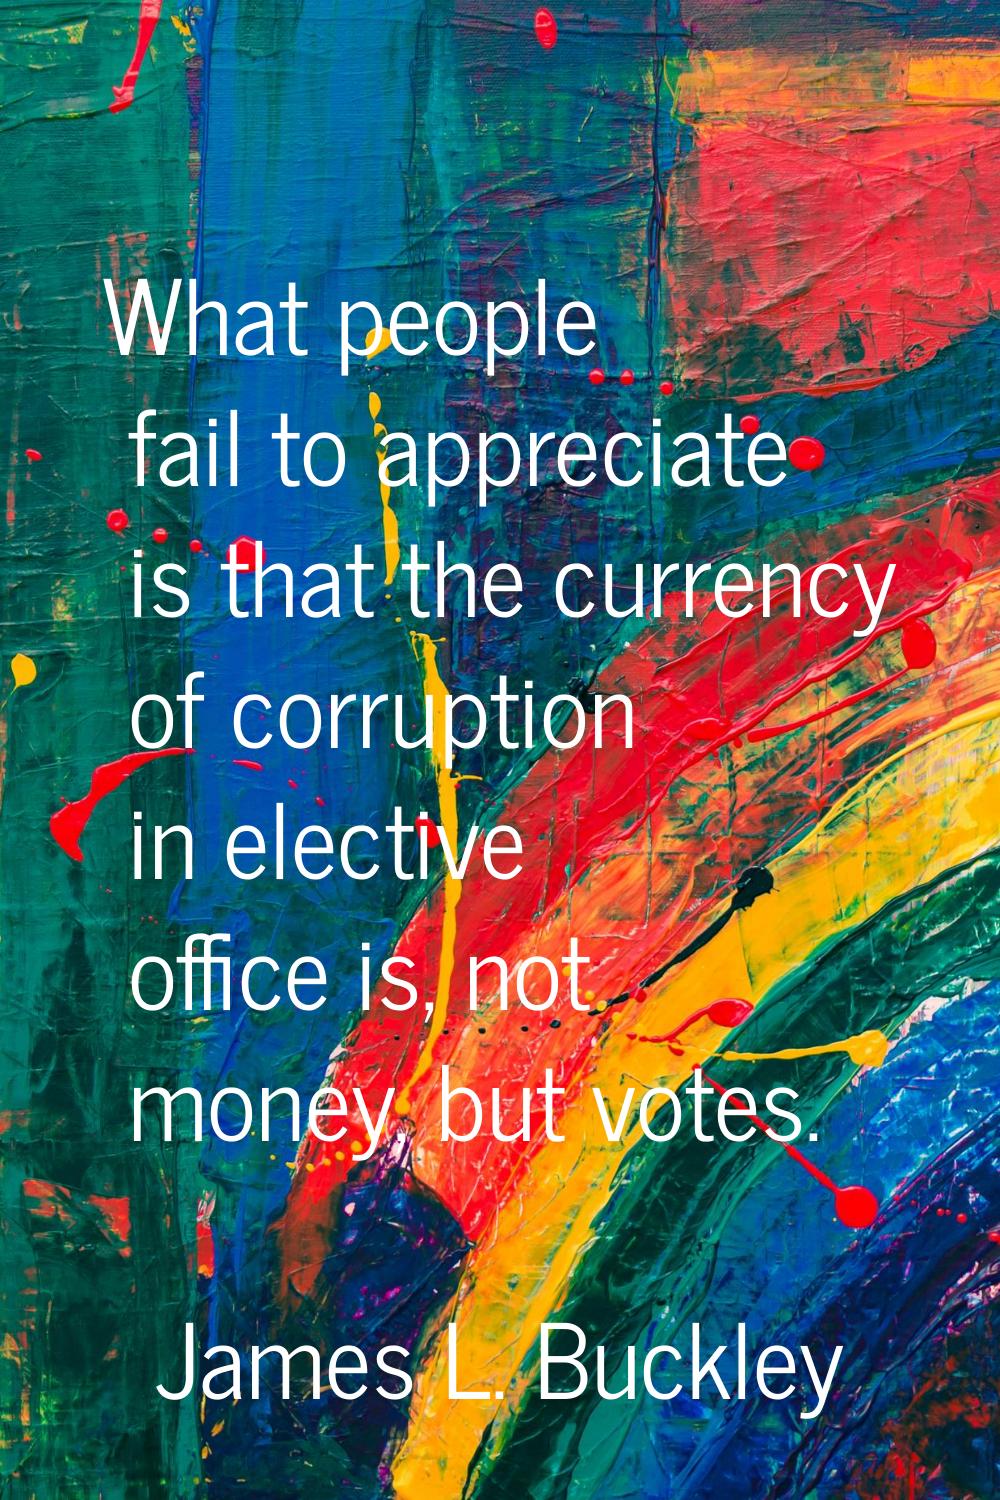 What people fail to appreciate is that the currency of corruption in elective office is, not money,